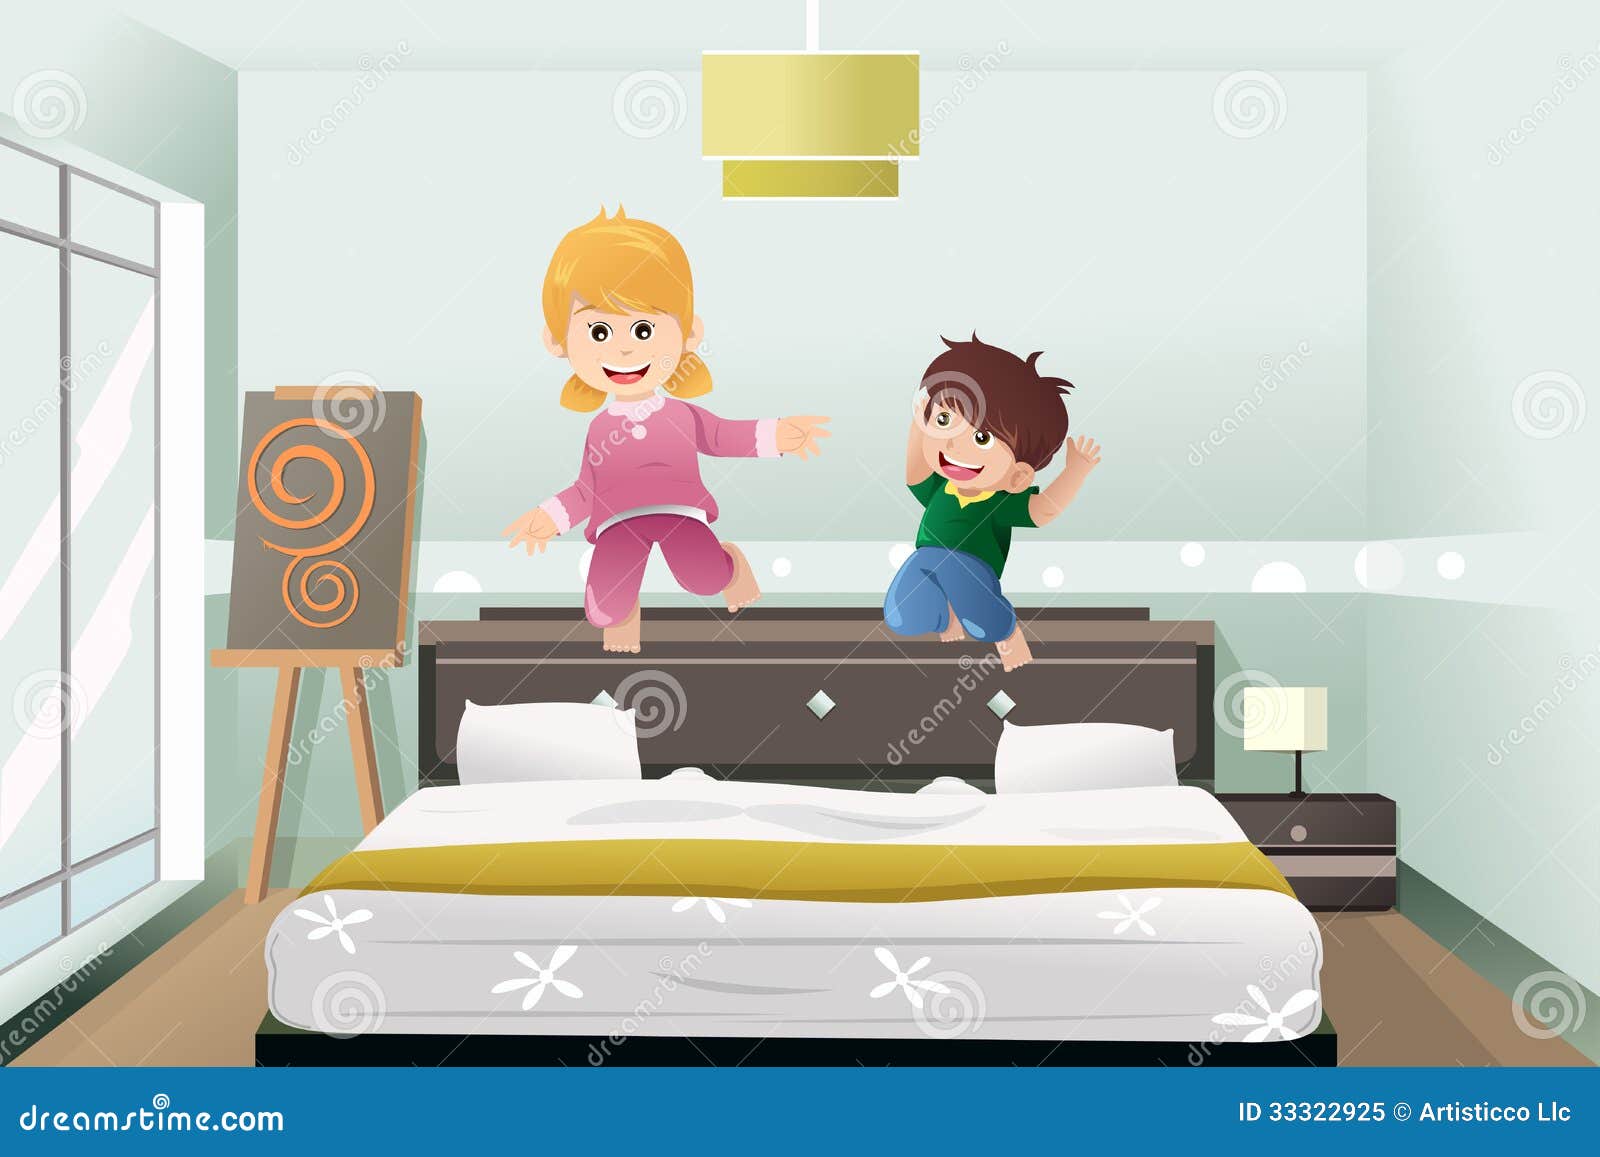 Kids Jumping On The Bed Royalty Free Stock Photo - Image: 33322925